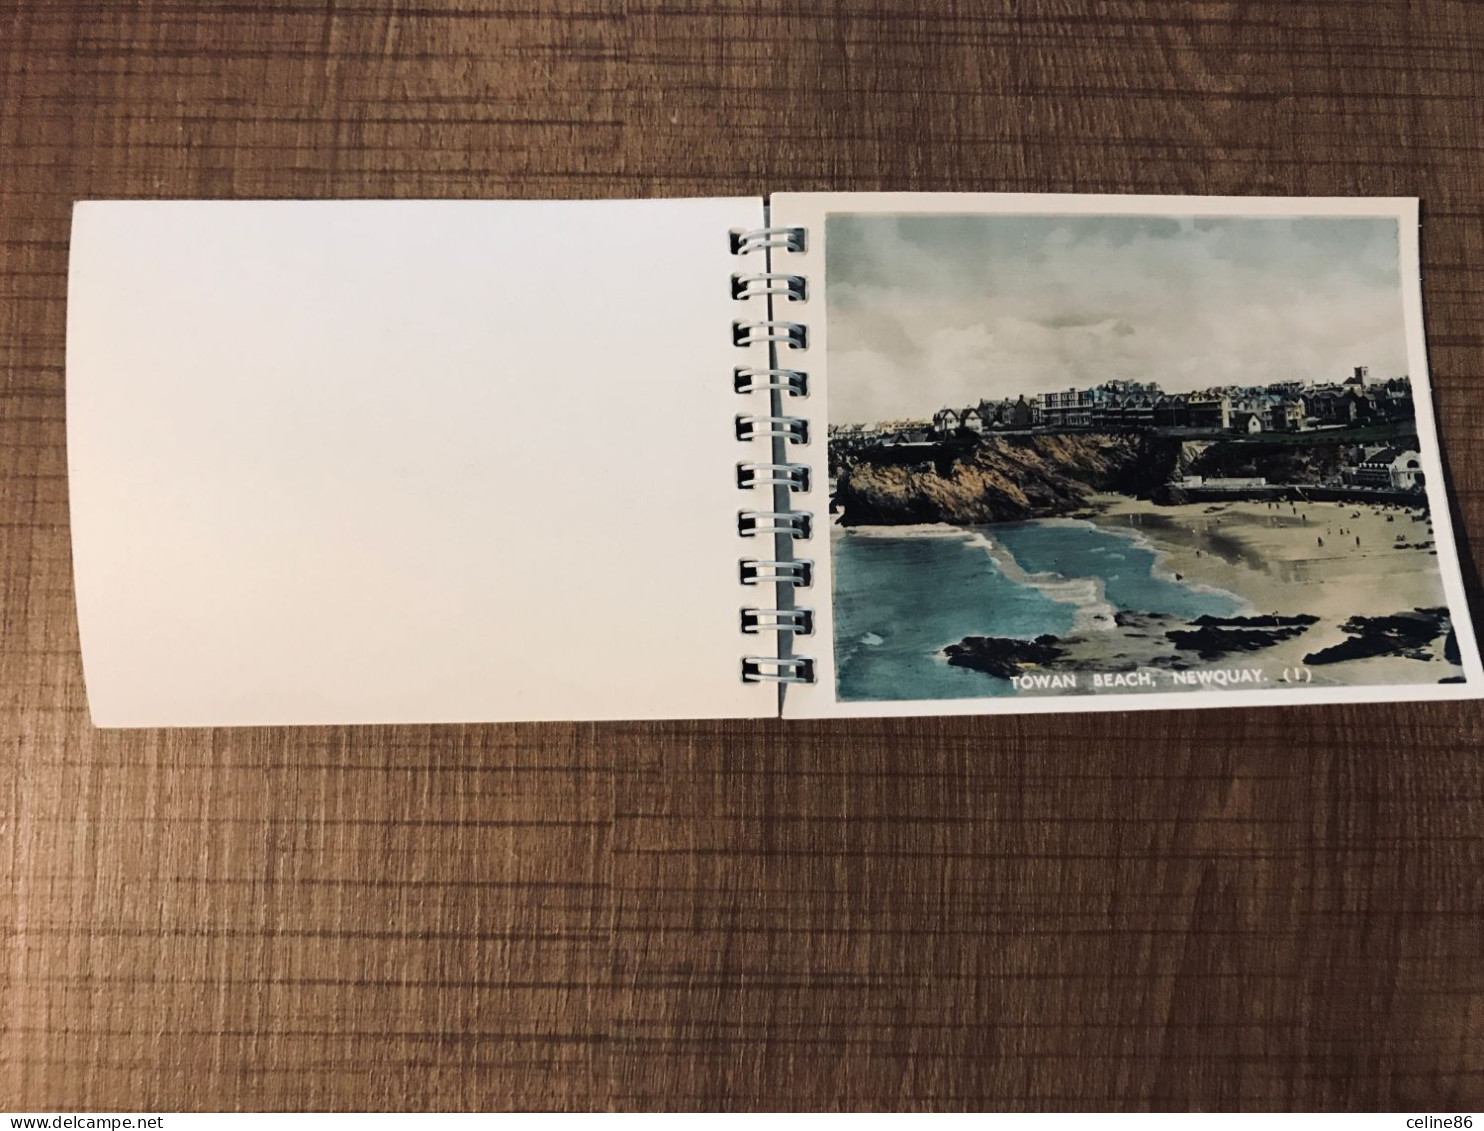  Carnet Twelve Real Photo Hand Coloured Snapshots Of NEWQUAY CORNWALL  - Newquay